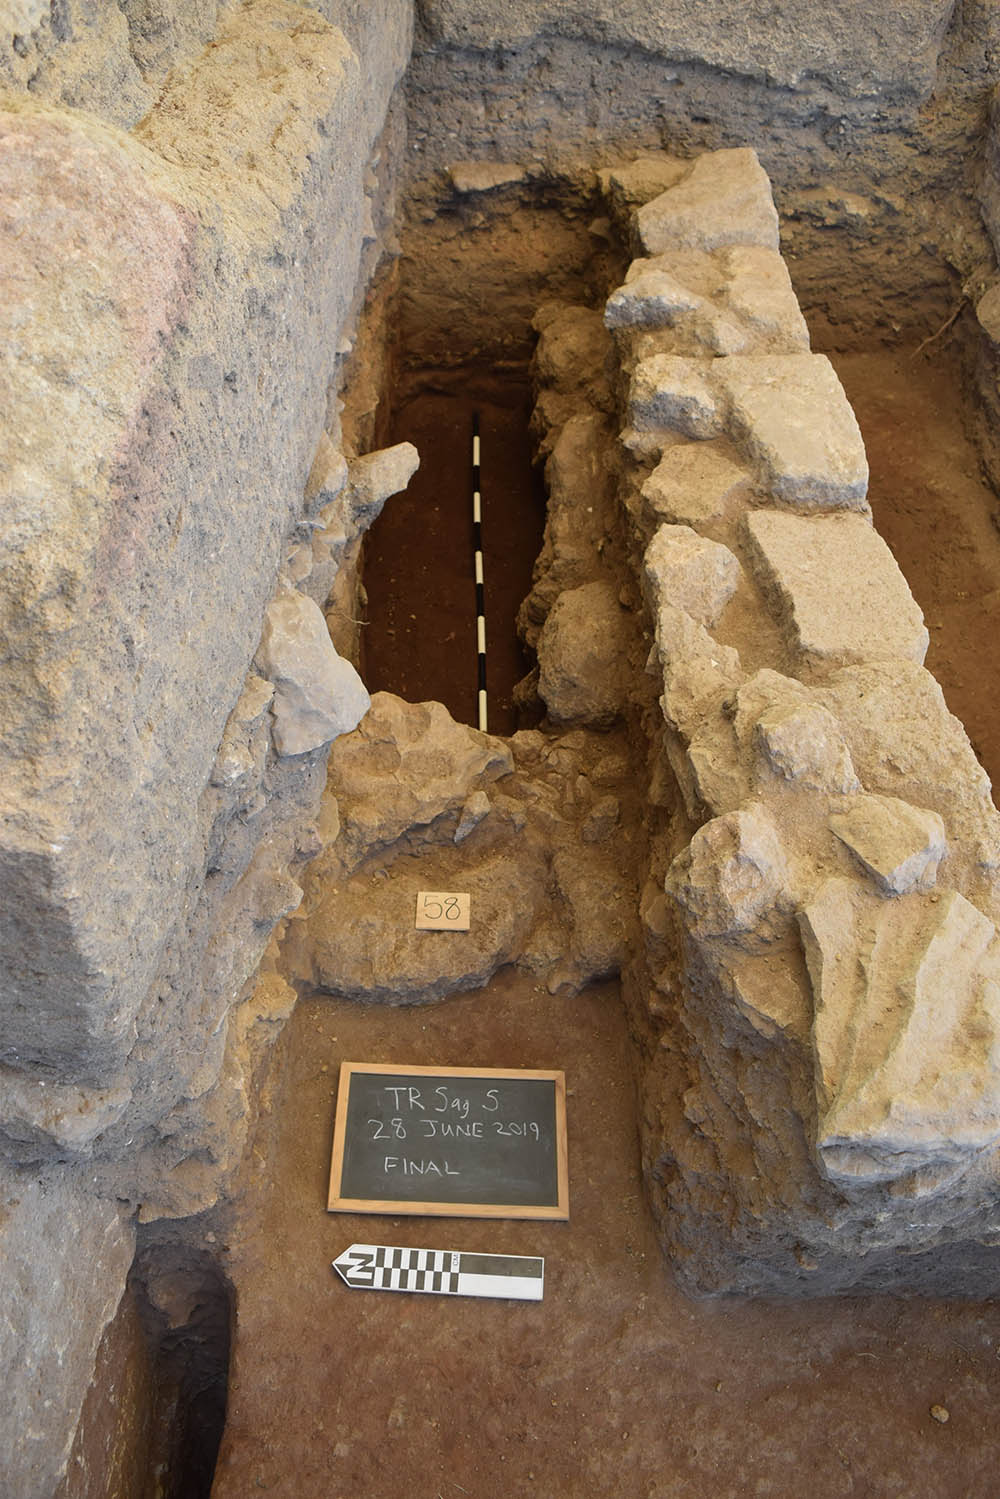 View of a trench during excavation.